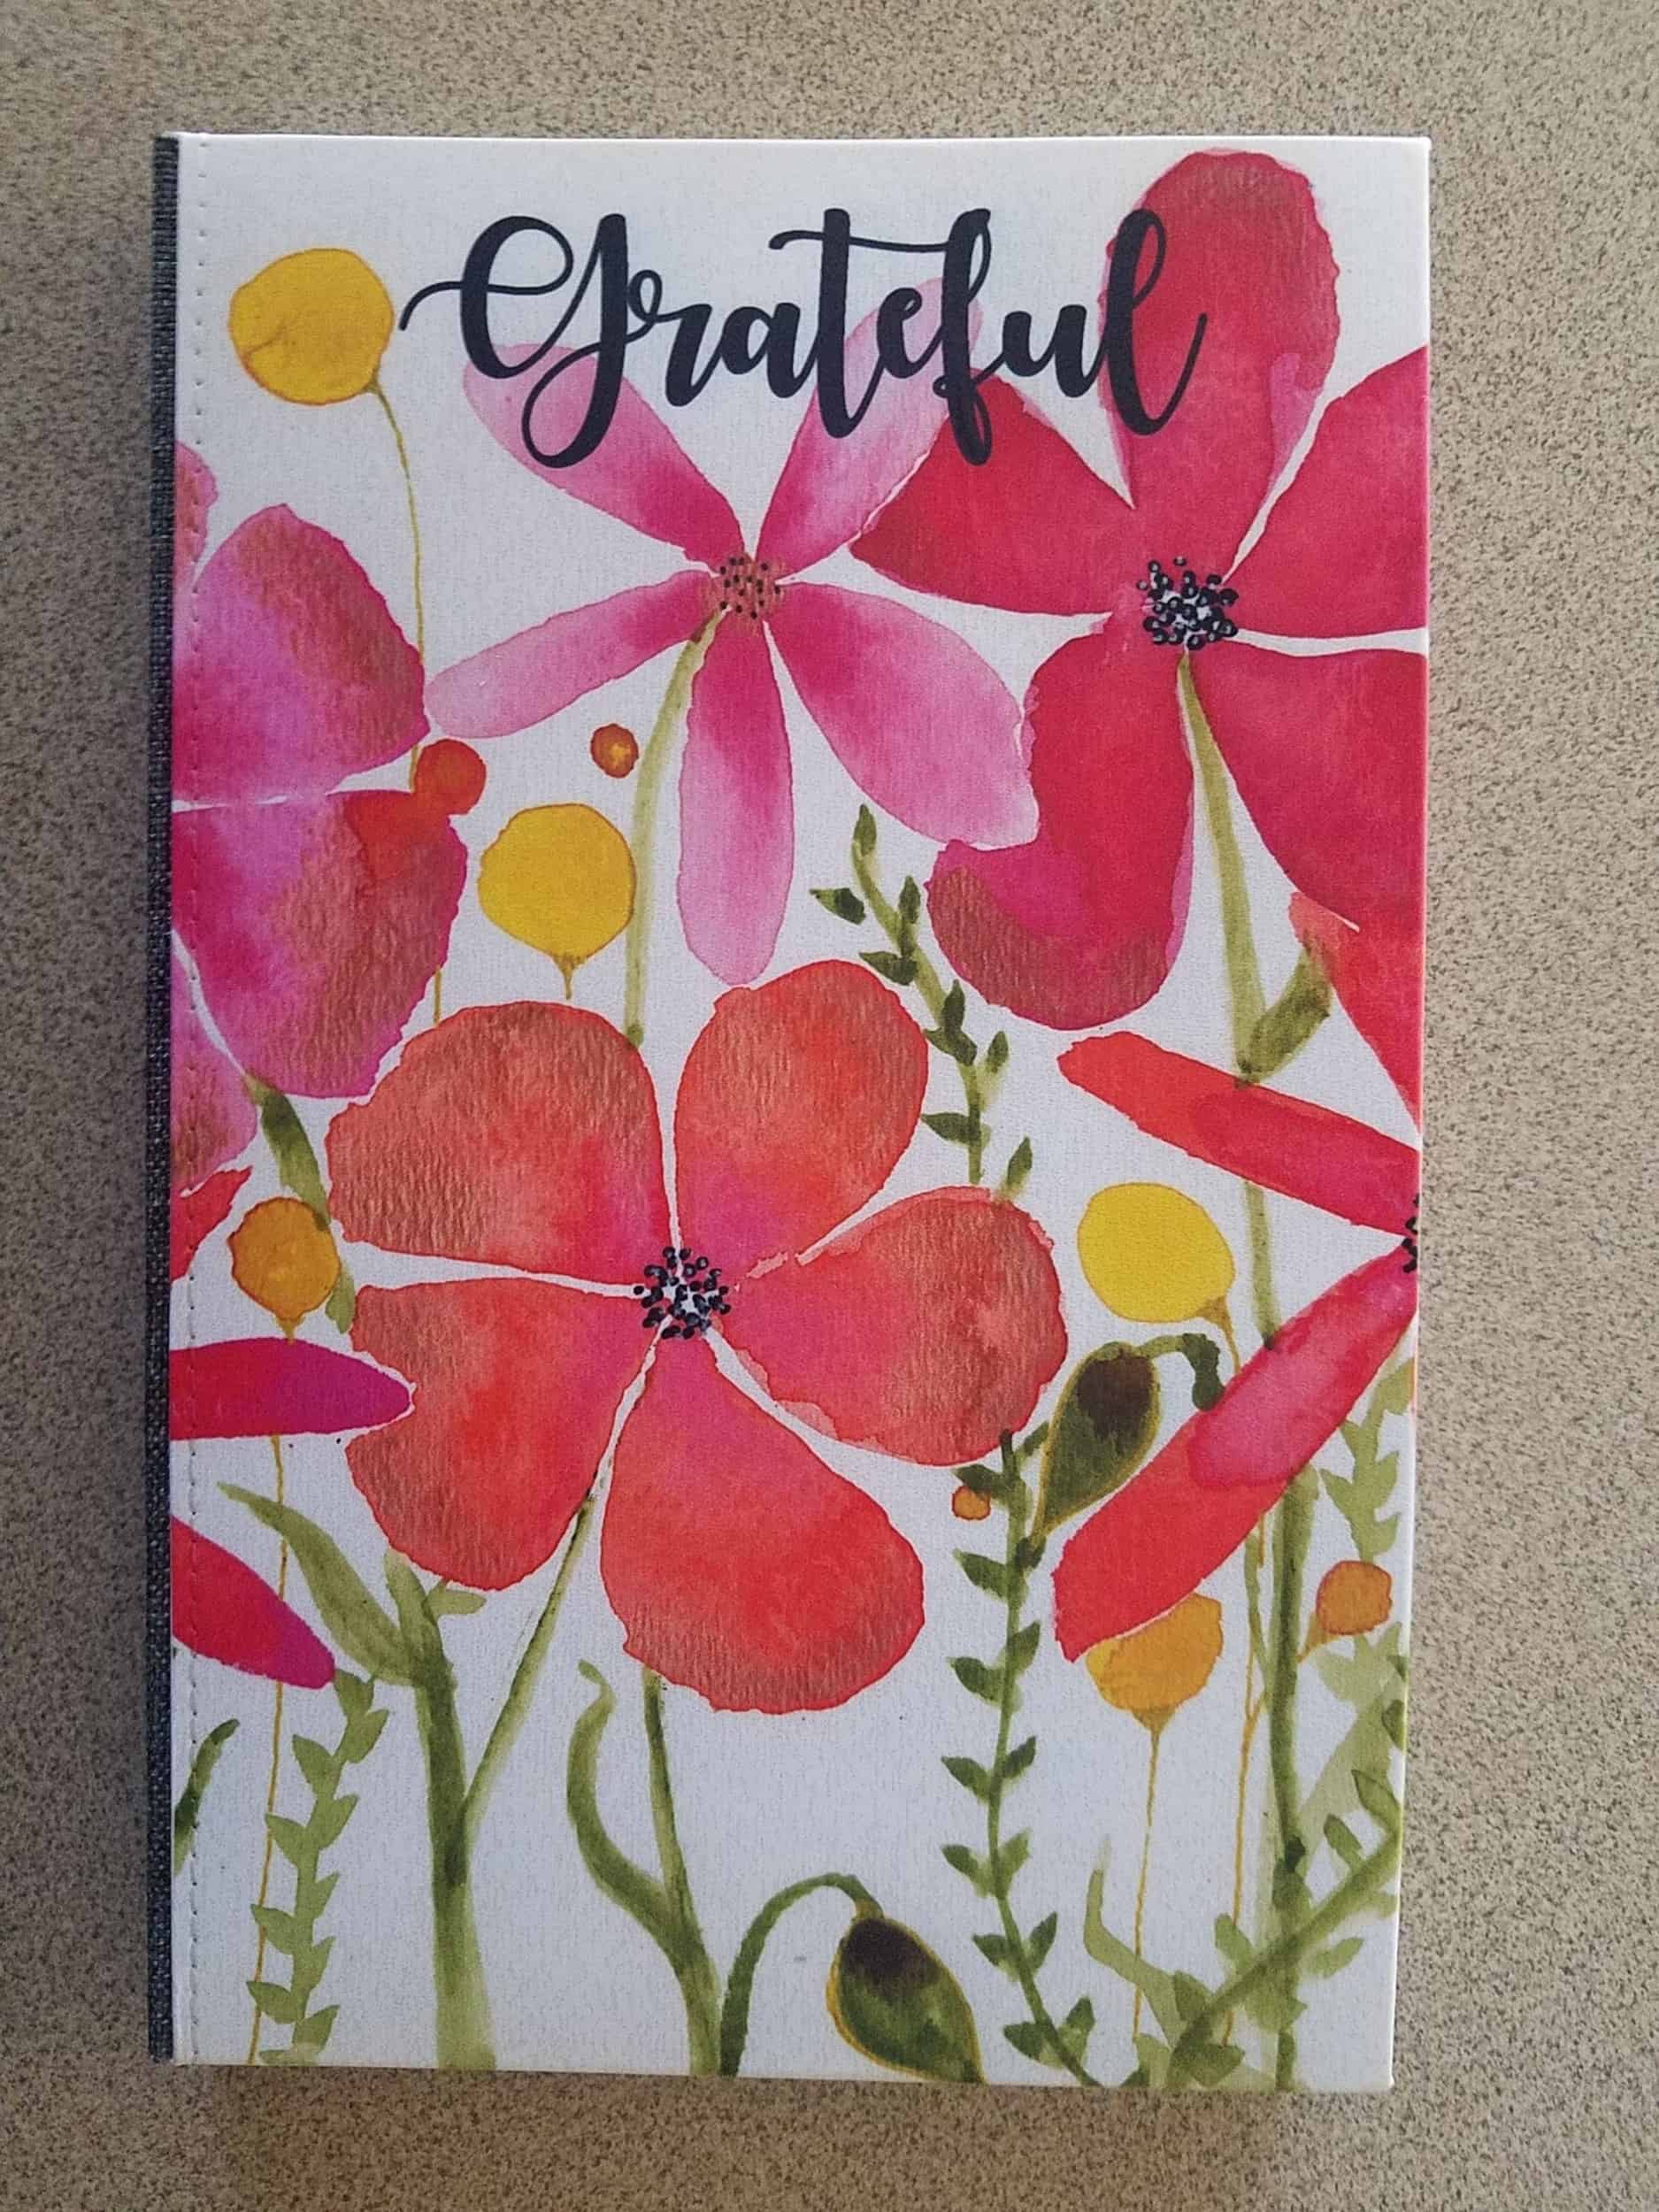 This "Grateful" Journal is made with love by Studio Patty D! Shop more unique gift ideas today with Spots Initiatives, the best way to support creators.